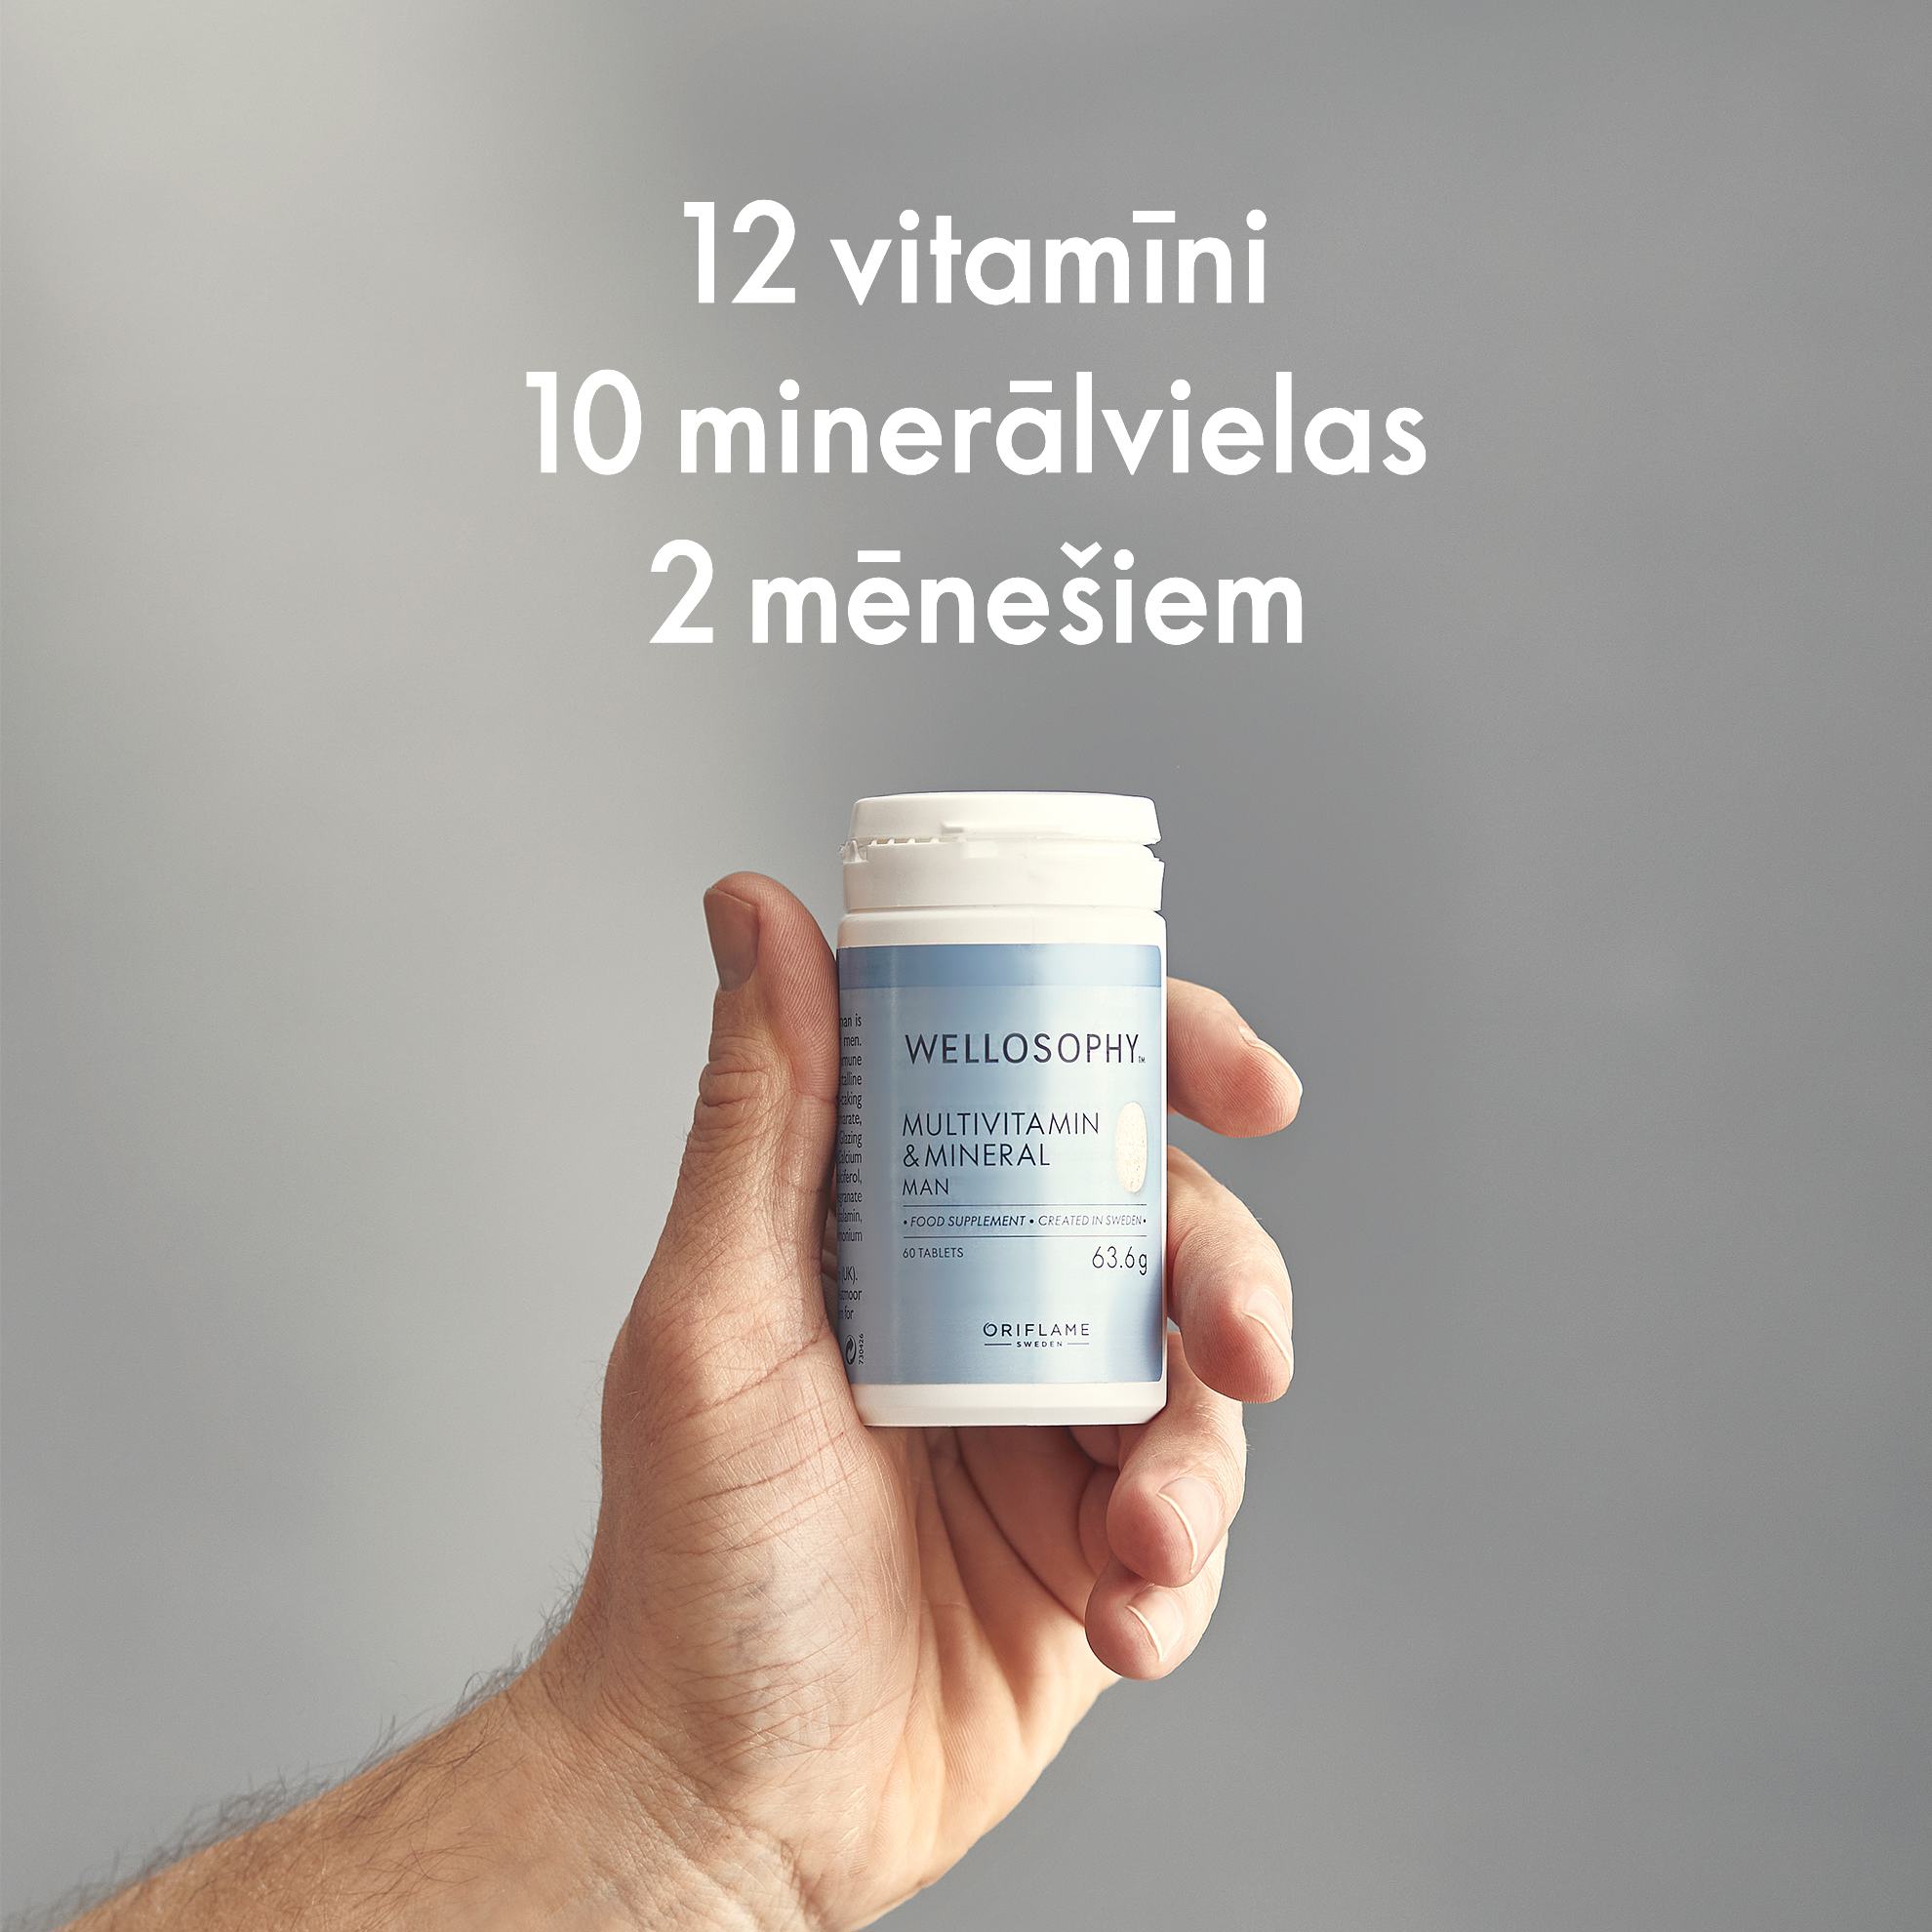 https://media-cdn.oriflame.com/productImage?externalMediaId=product-management-media%2fProducts%2f38558%2fLV%2f38558_4.png&id=18321799&version=1